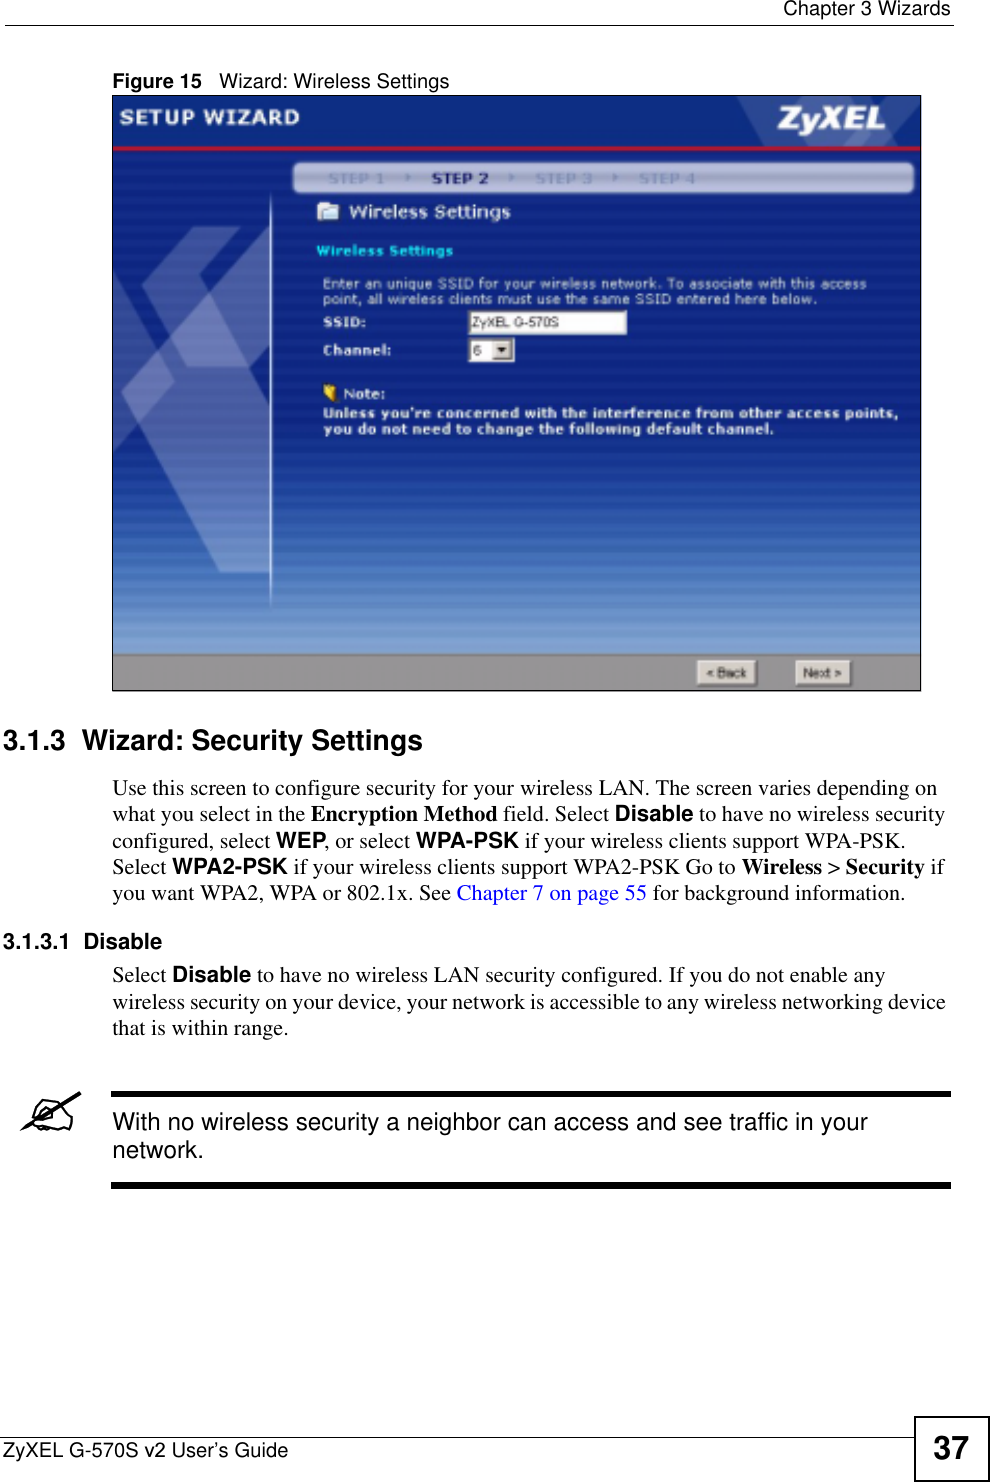  Chapter 3 WizardsZyXEL G-570S v2 User’s Guide 37Figure 15   Wizard: Wireless Settings3.1.3  Wizard: Security SettingsUse this screen to configure security for your wireless LAN. The screen varies depending on what you select in the Encryption Method field. Select Disable to have no wireless security configured, select WEP, or select WPA-PSK if your wireless clients support WPA-PSK. Select WPA2-PSK if your wireless clients support WPA2-PSK Go to Wireless &gt; Security if you want WPA2, WPA or 802.1x. See Chapter 7 on page 55 for background information.3.1.3.1  DisableSelect Disable to have no wireless LAN security configured. If you do not enable any wireless security on your device, your network is accessible to any wireless networking device that is within range. &quot;With no wireless security a neighbor can access and see traffic in your network.